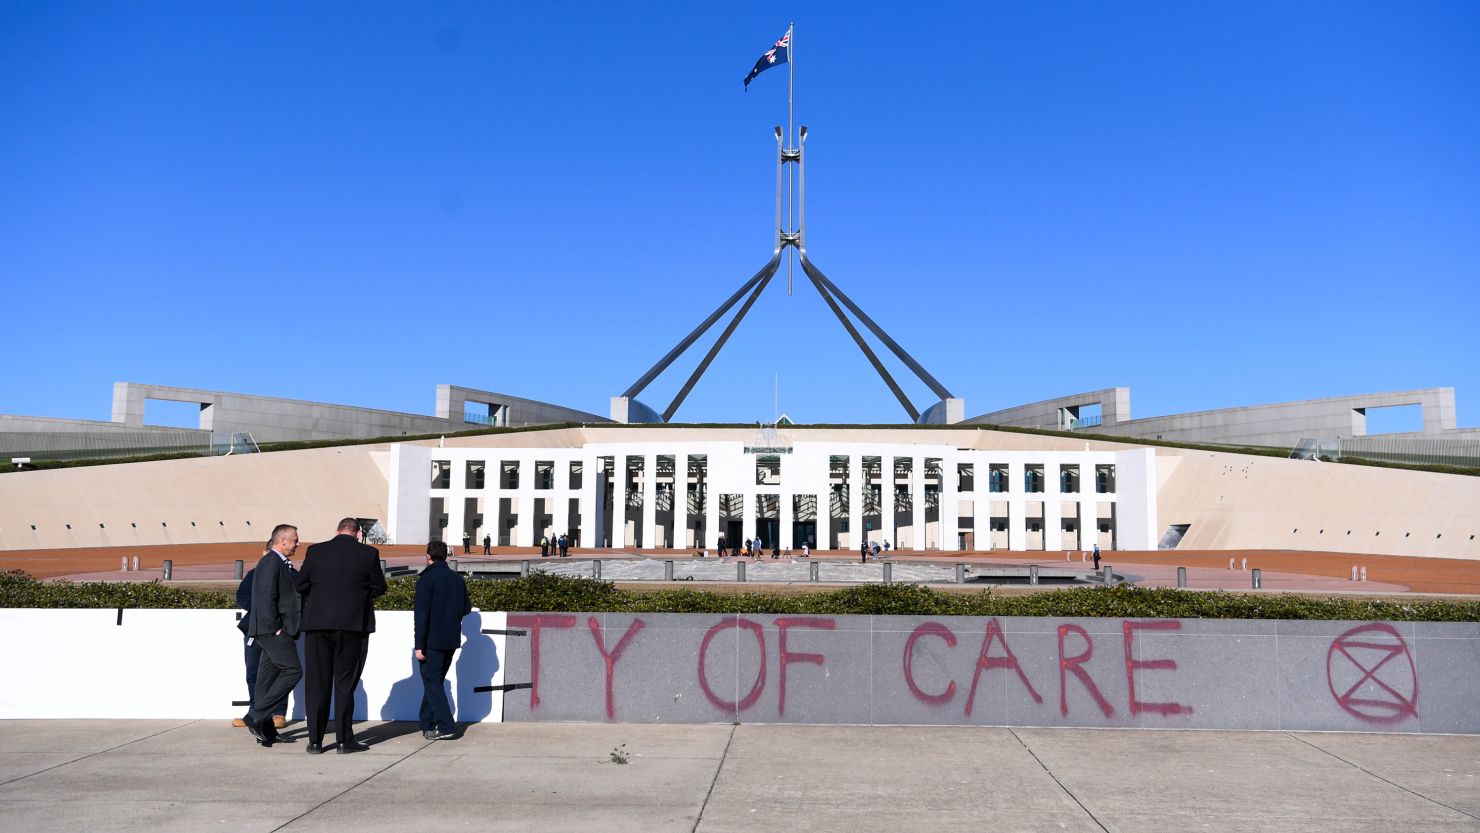 Workers cover the slogan 'Duty of Care' after an Extinction Rebellion protest outside Parliament House, in Canberra, Monday, August 10.